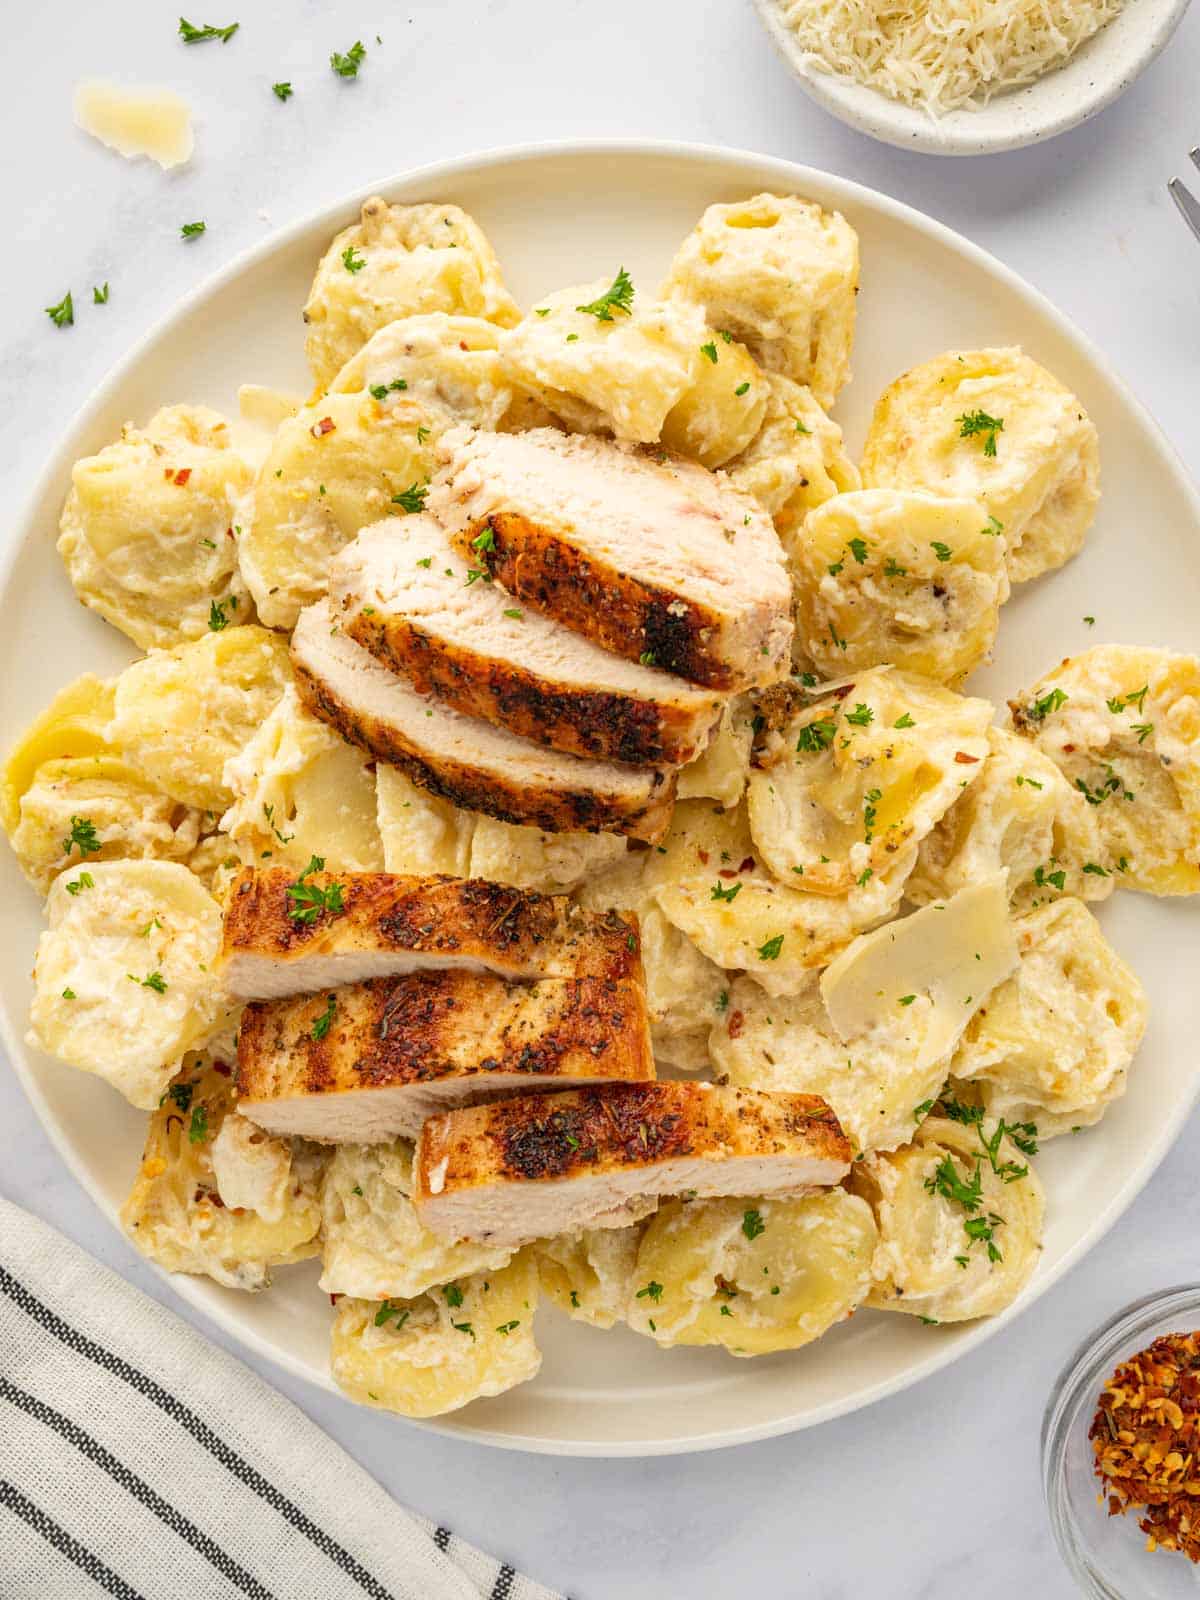 A plate with tortellini and slices of grilled chicken.